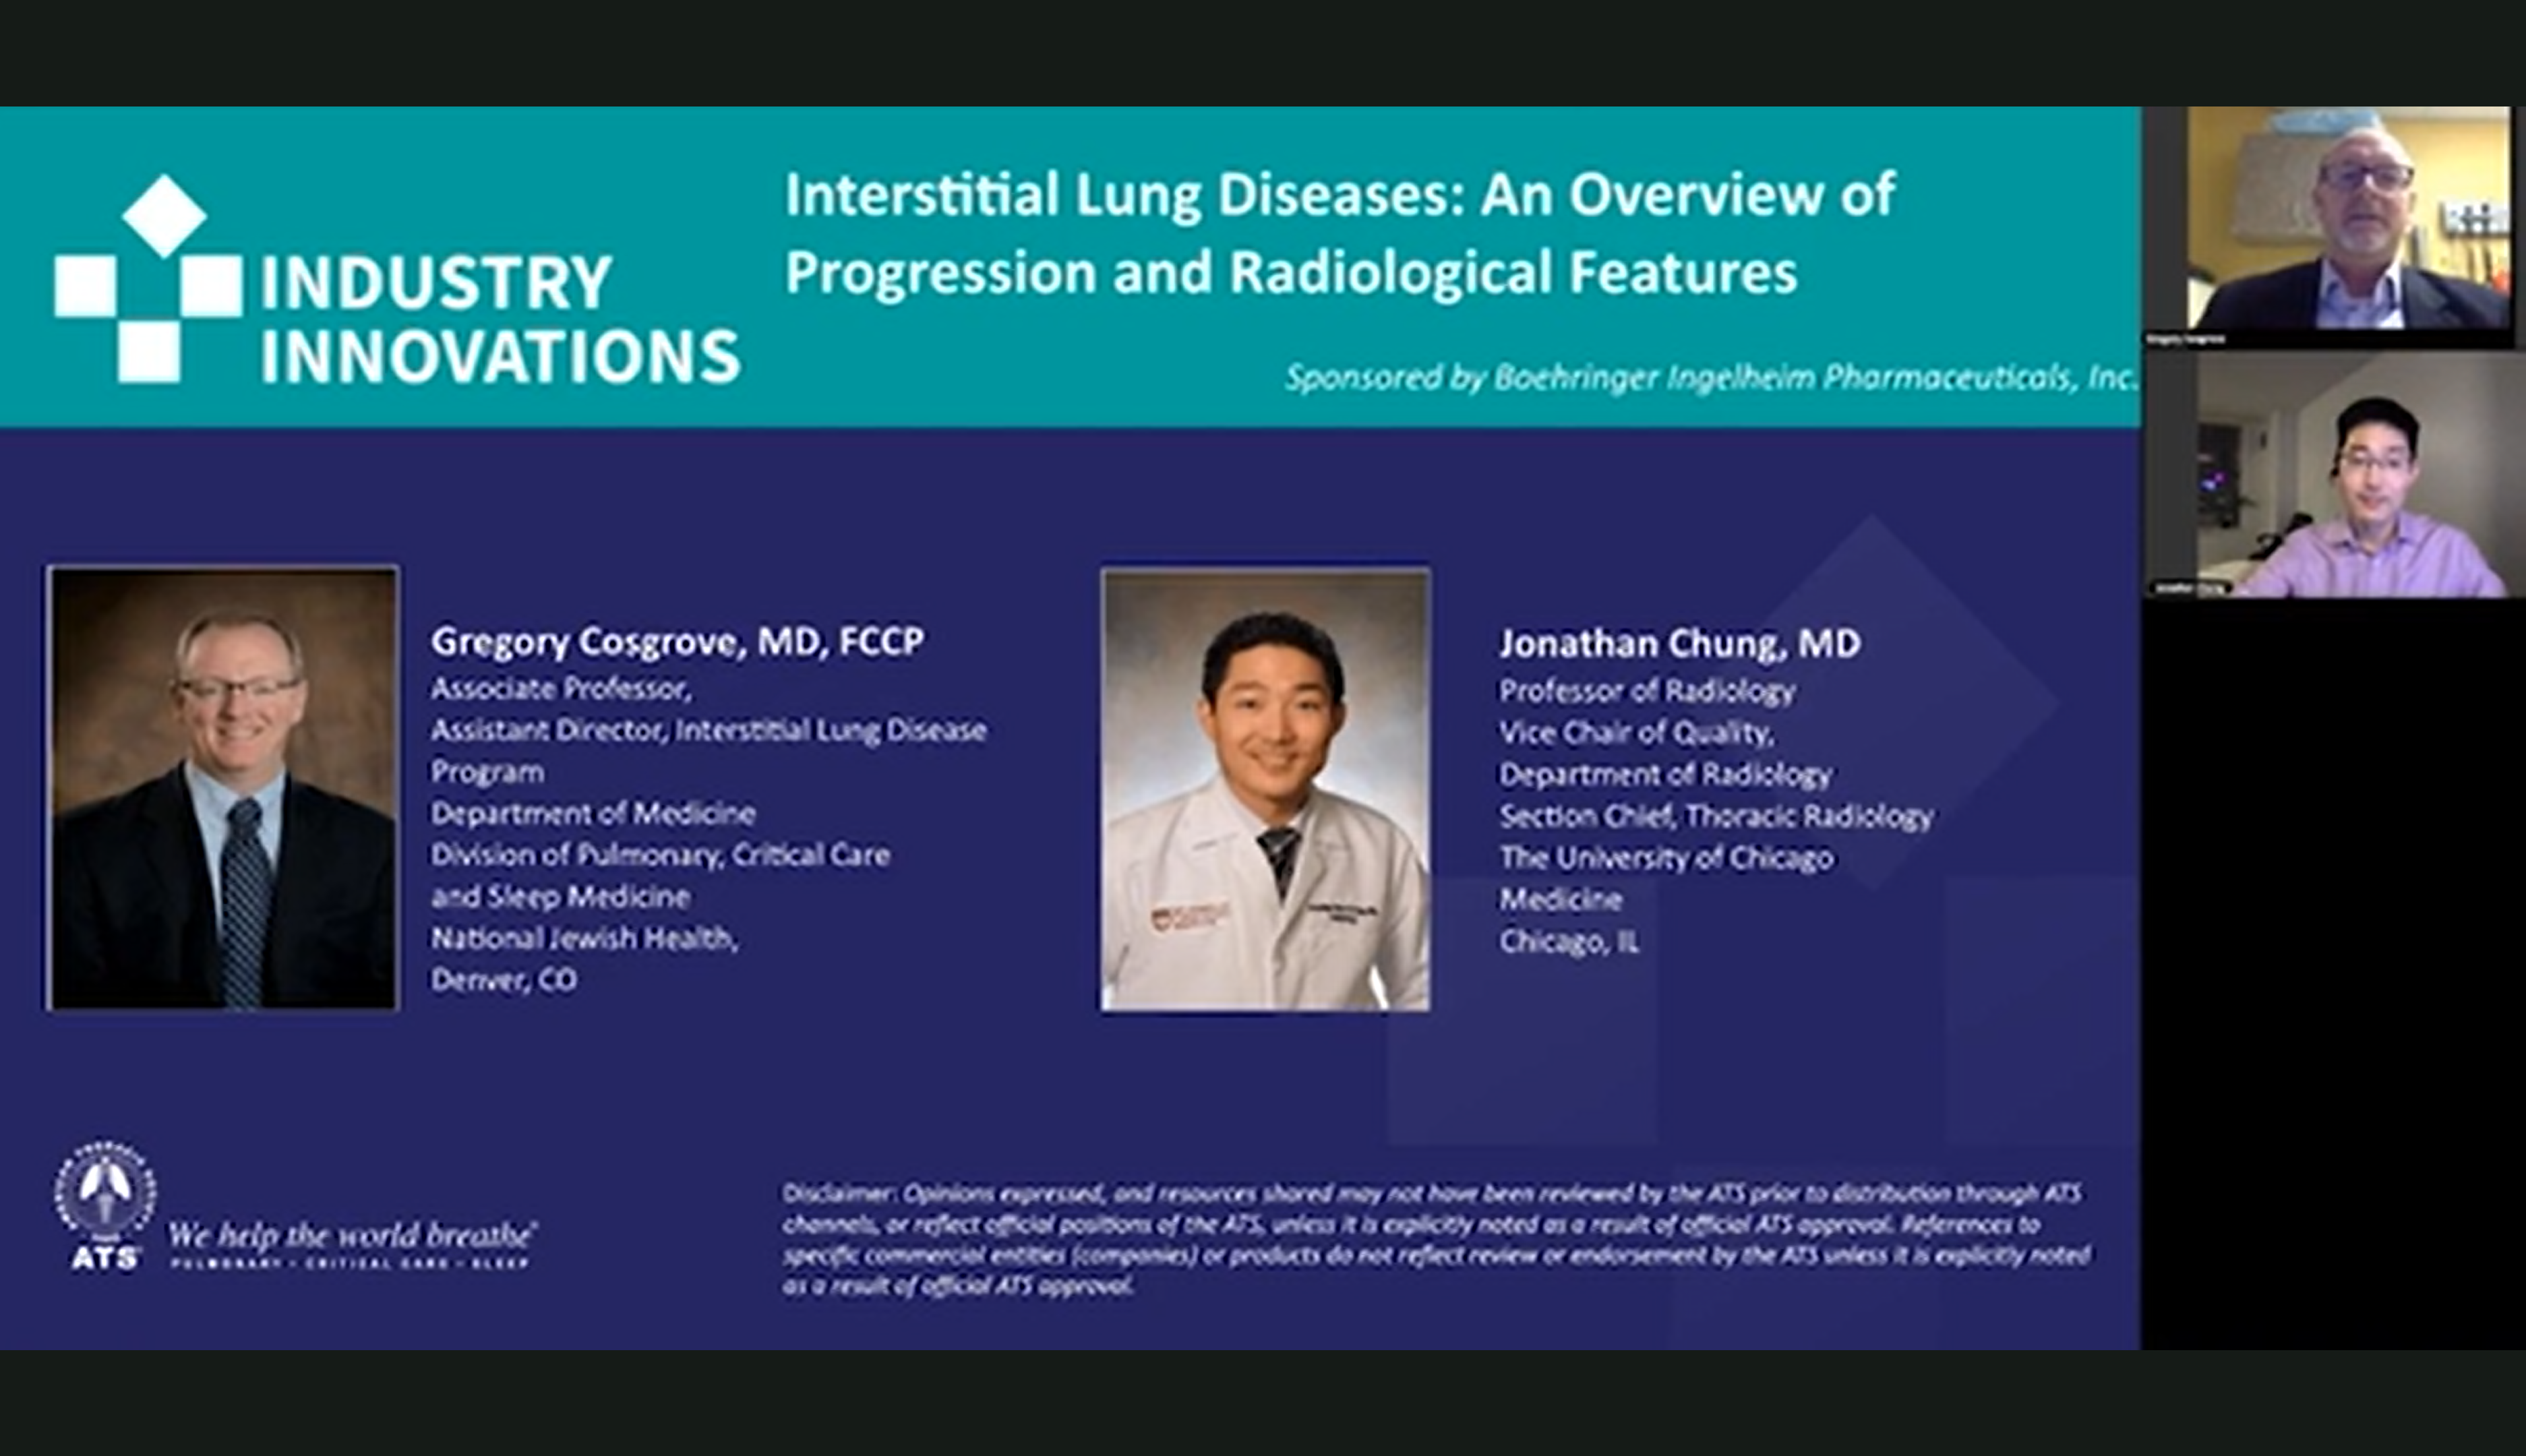 Interstitial lung diseases: an overview of progression and radiological features